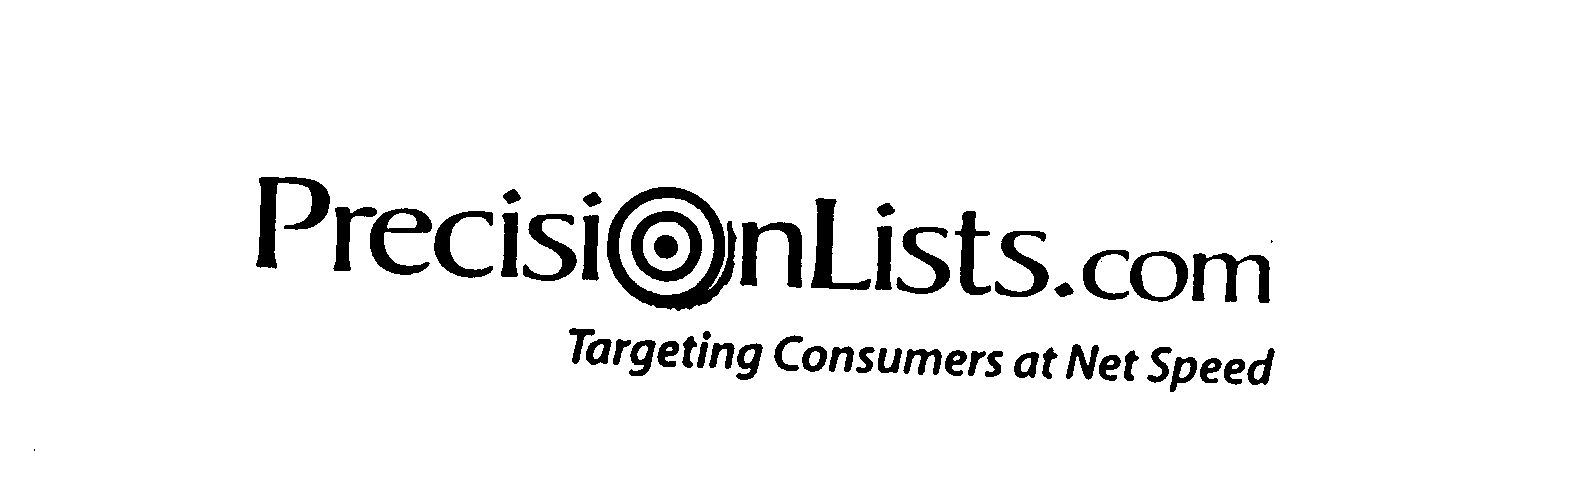  PRECISIONLISTS.COM TARGETING CONSUMERS AT NET SPEED